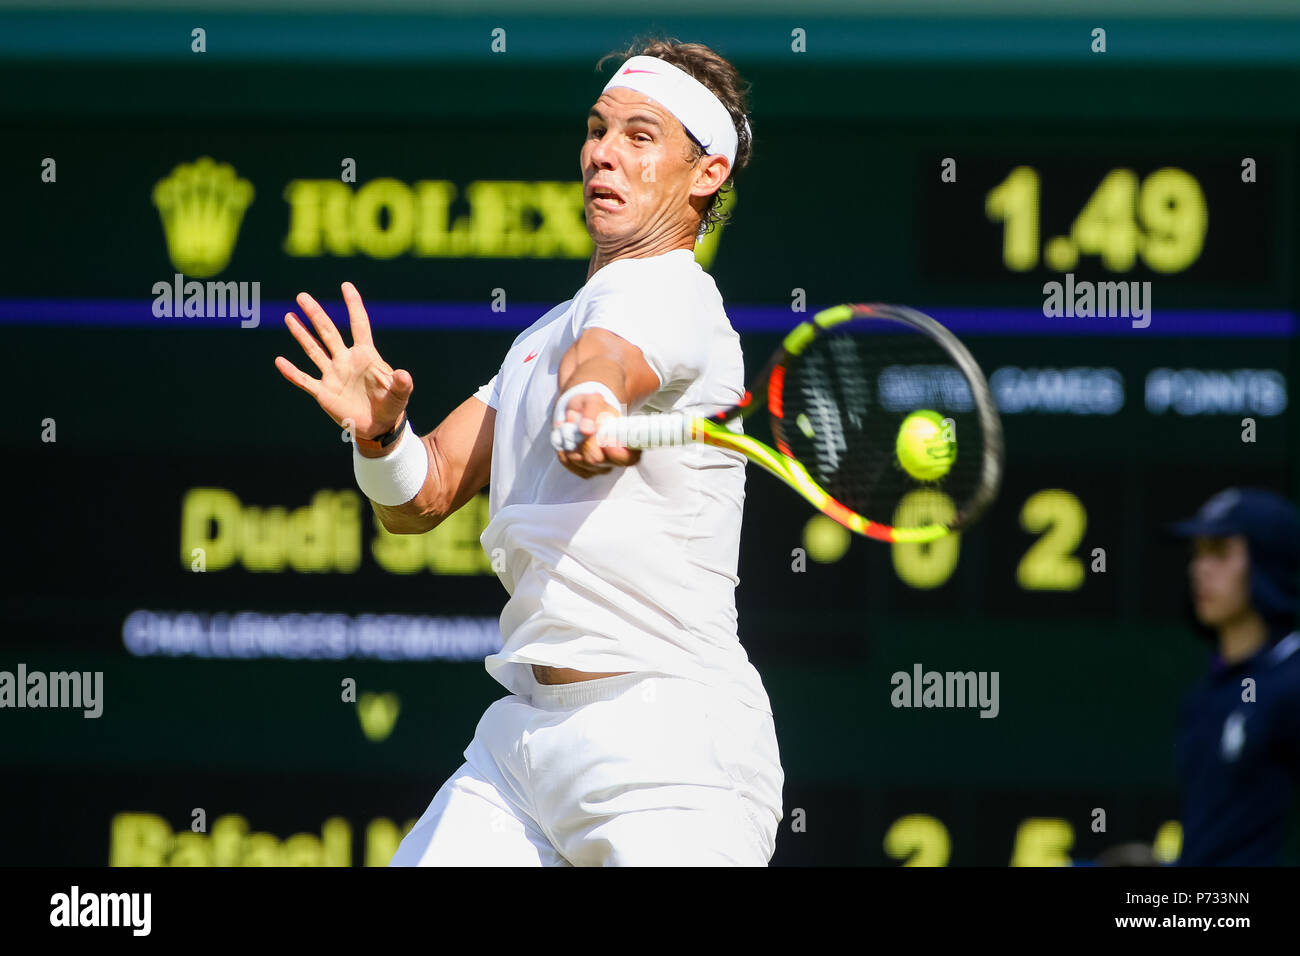 London, UK. 3rd July, 2018. Rafael Nadal (ESP) Tennis : Rafael Nadal of Spain during the Men's singles first round match of the Wimbledon Lawn Tennis Championships against Dudi Sela of Israel at the All England Lawn Tennis and Croquet Club in London, England . Credit: AFLO/Alamy Live News Stock Photo